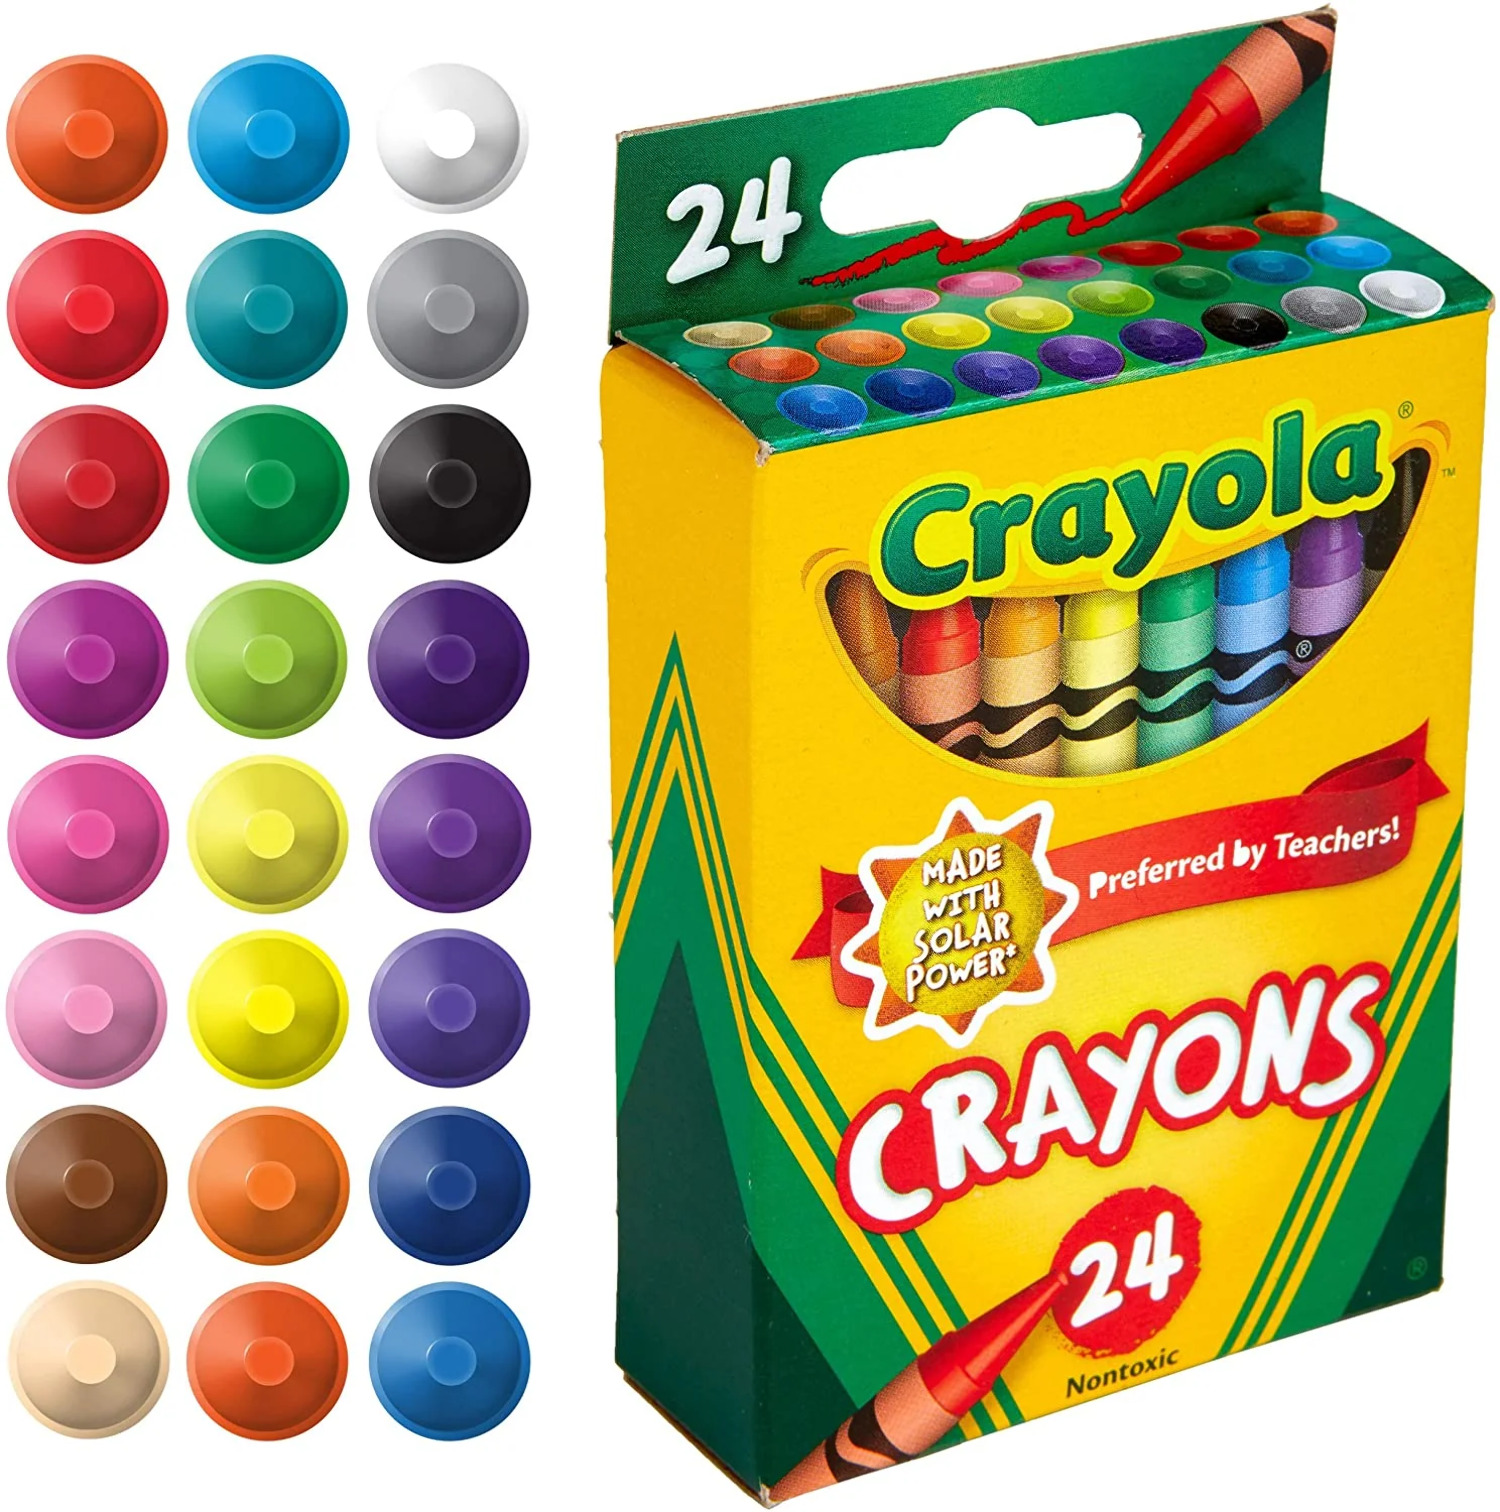 Crayola Classic Crayons, Assorted Colors, Back to School, 24 Count - image 5 of 6